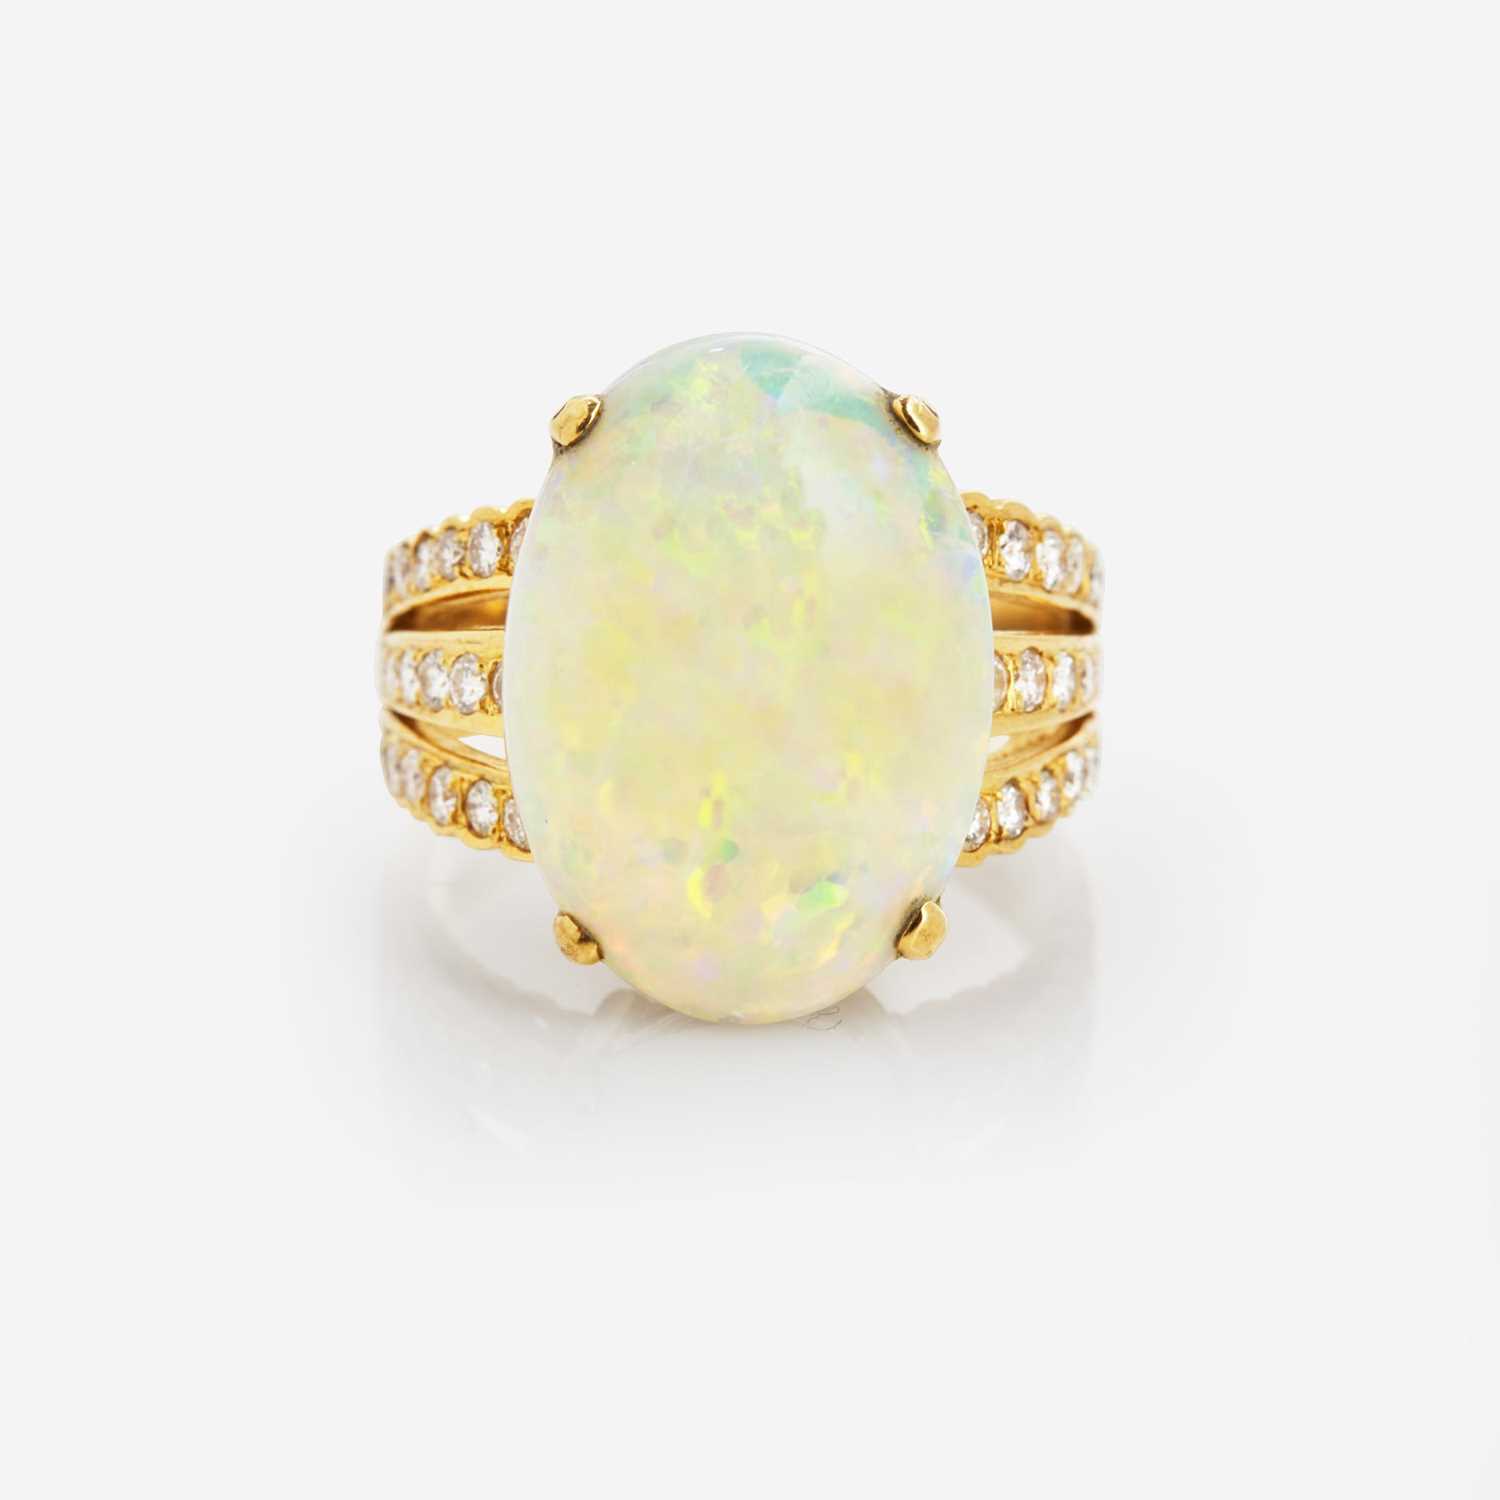 Lot 35 - An 18K Yellow Gold, Diamond, and Opal Ring